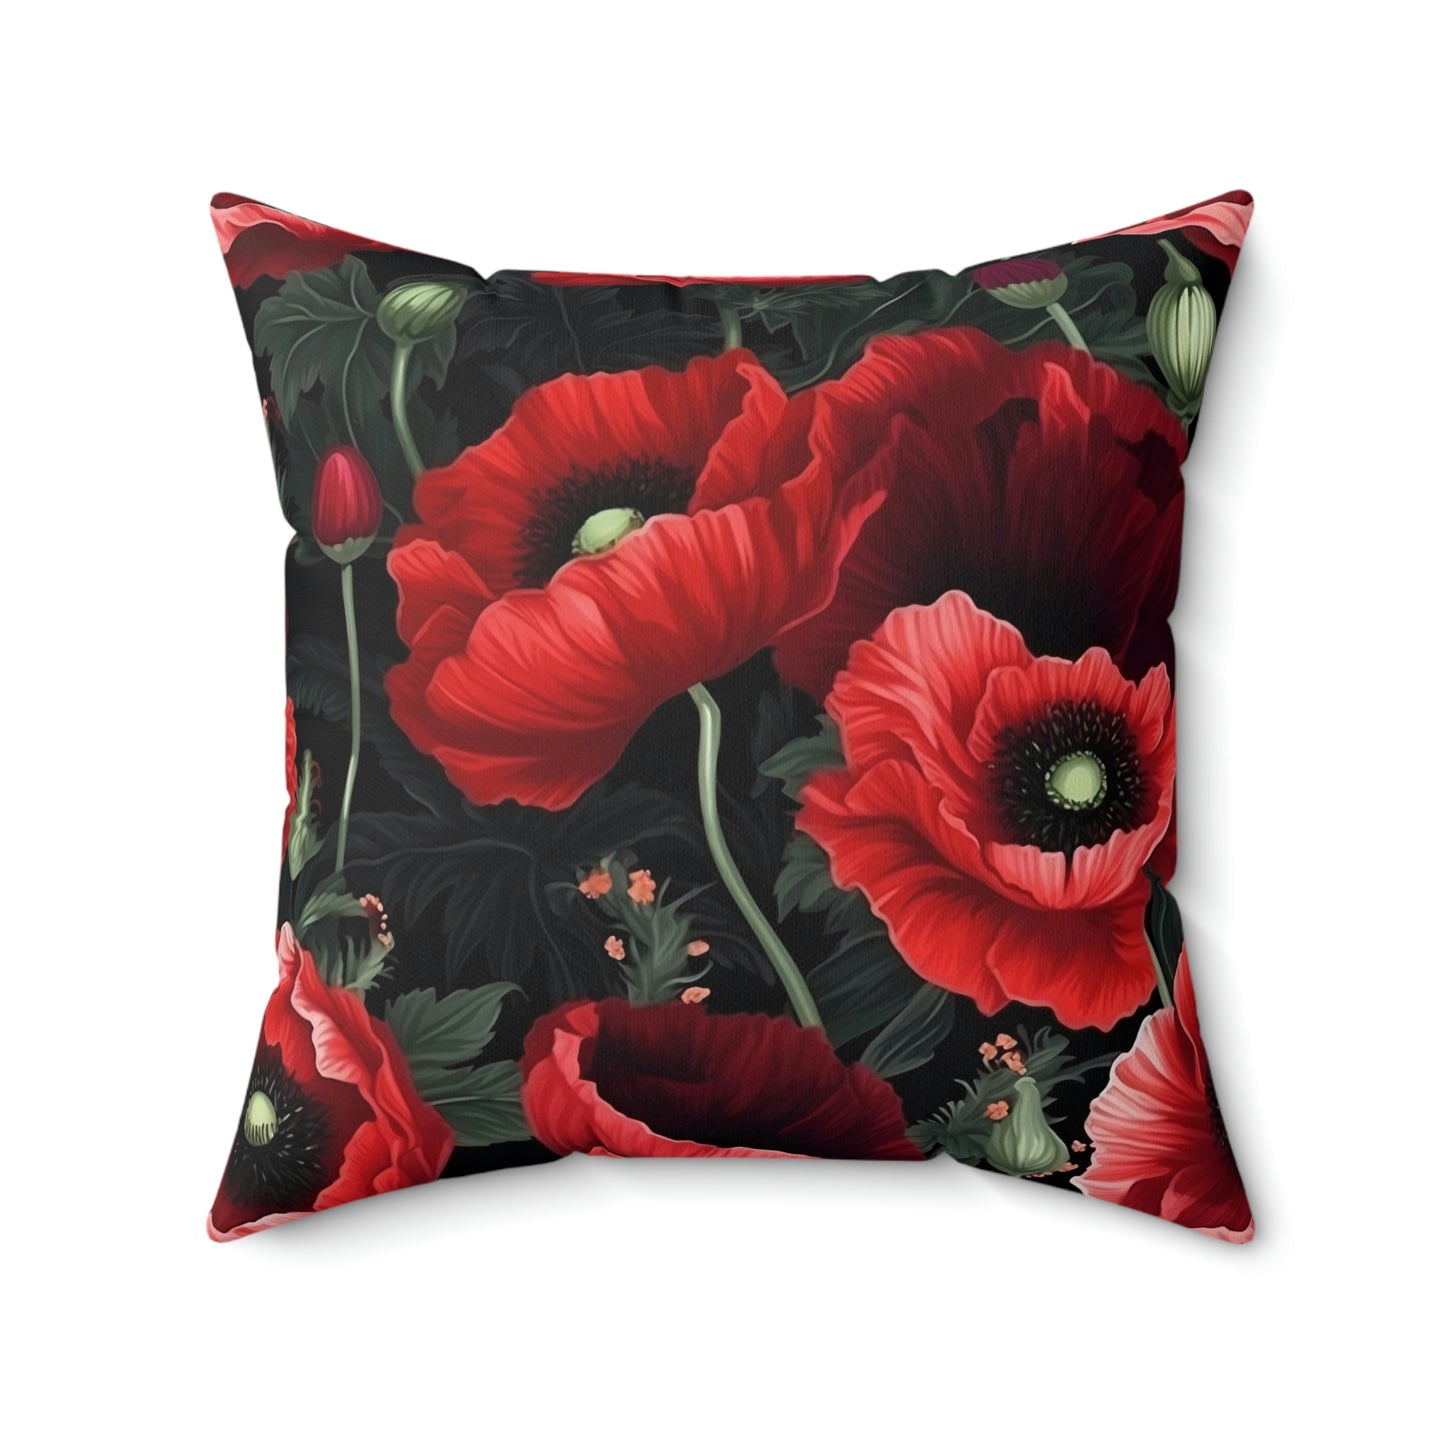 Poppy Filled Pillow with Insert, Red Poppies Floral Flowers Square Throw Accent Decorative Room Decor Floor Sofa Couch Cushion Starcove Fashion